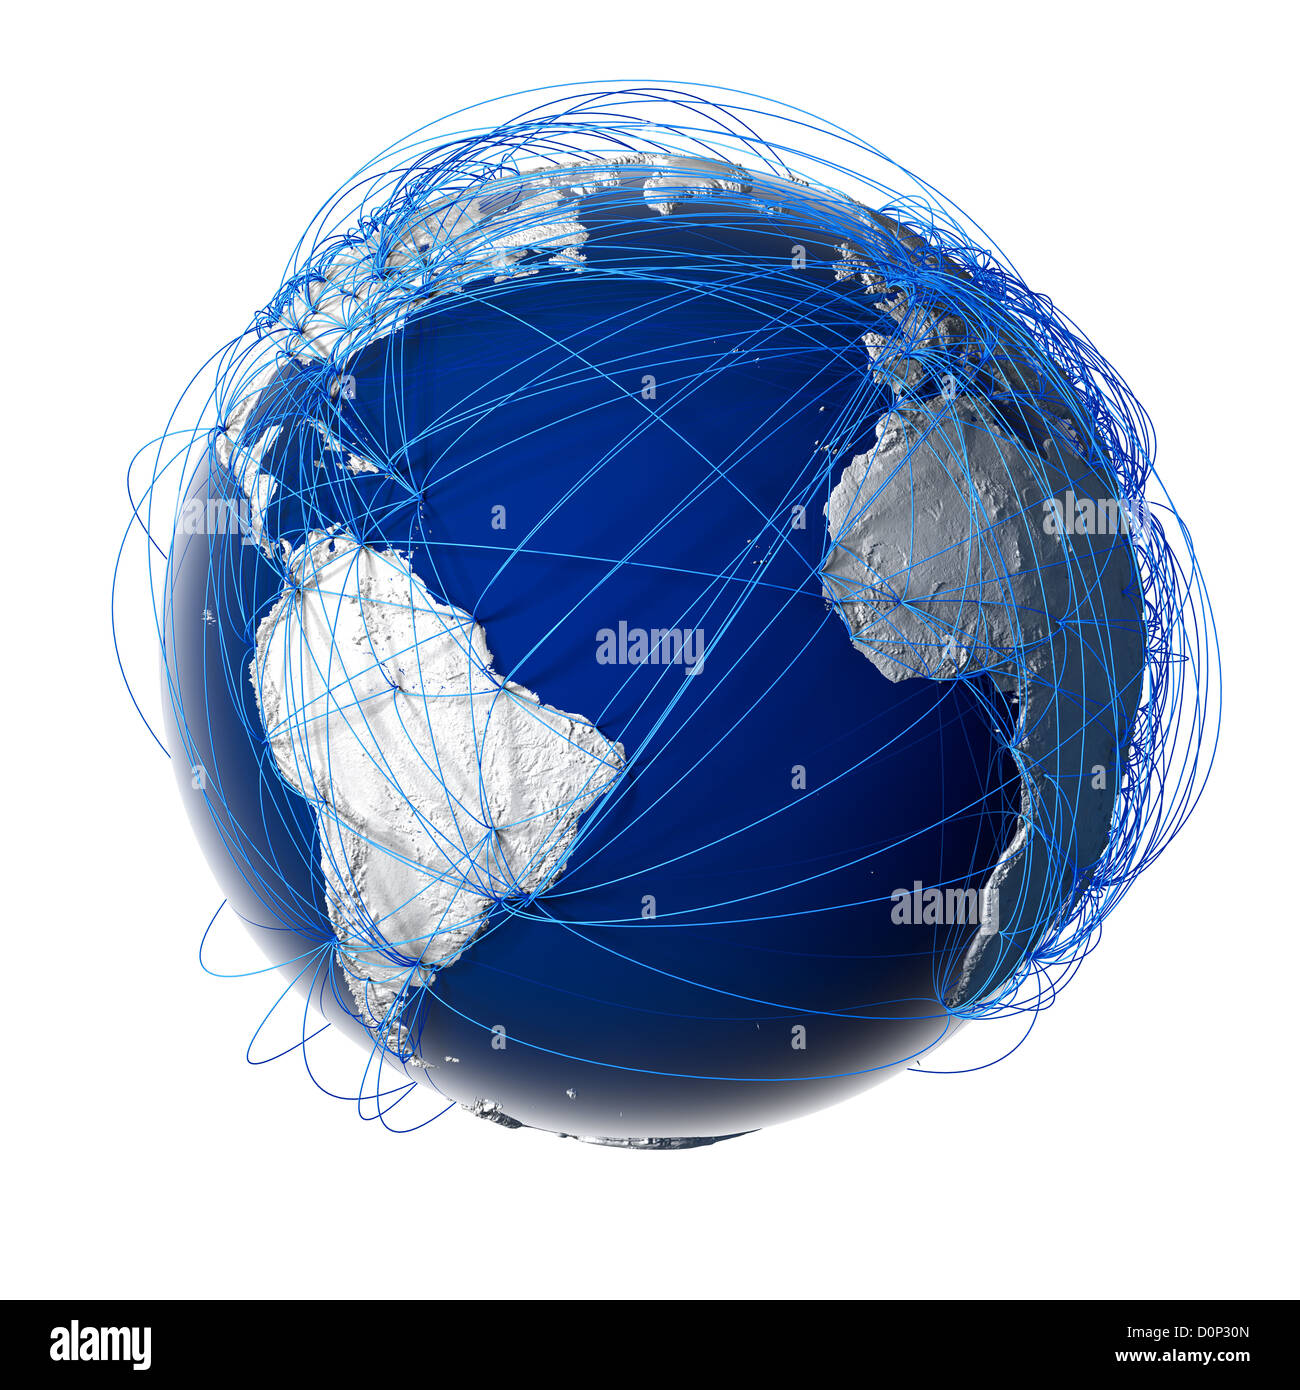 Major global aviation routes on the globe Stock Photo